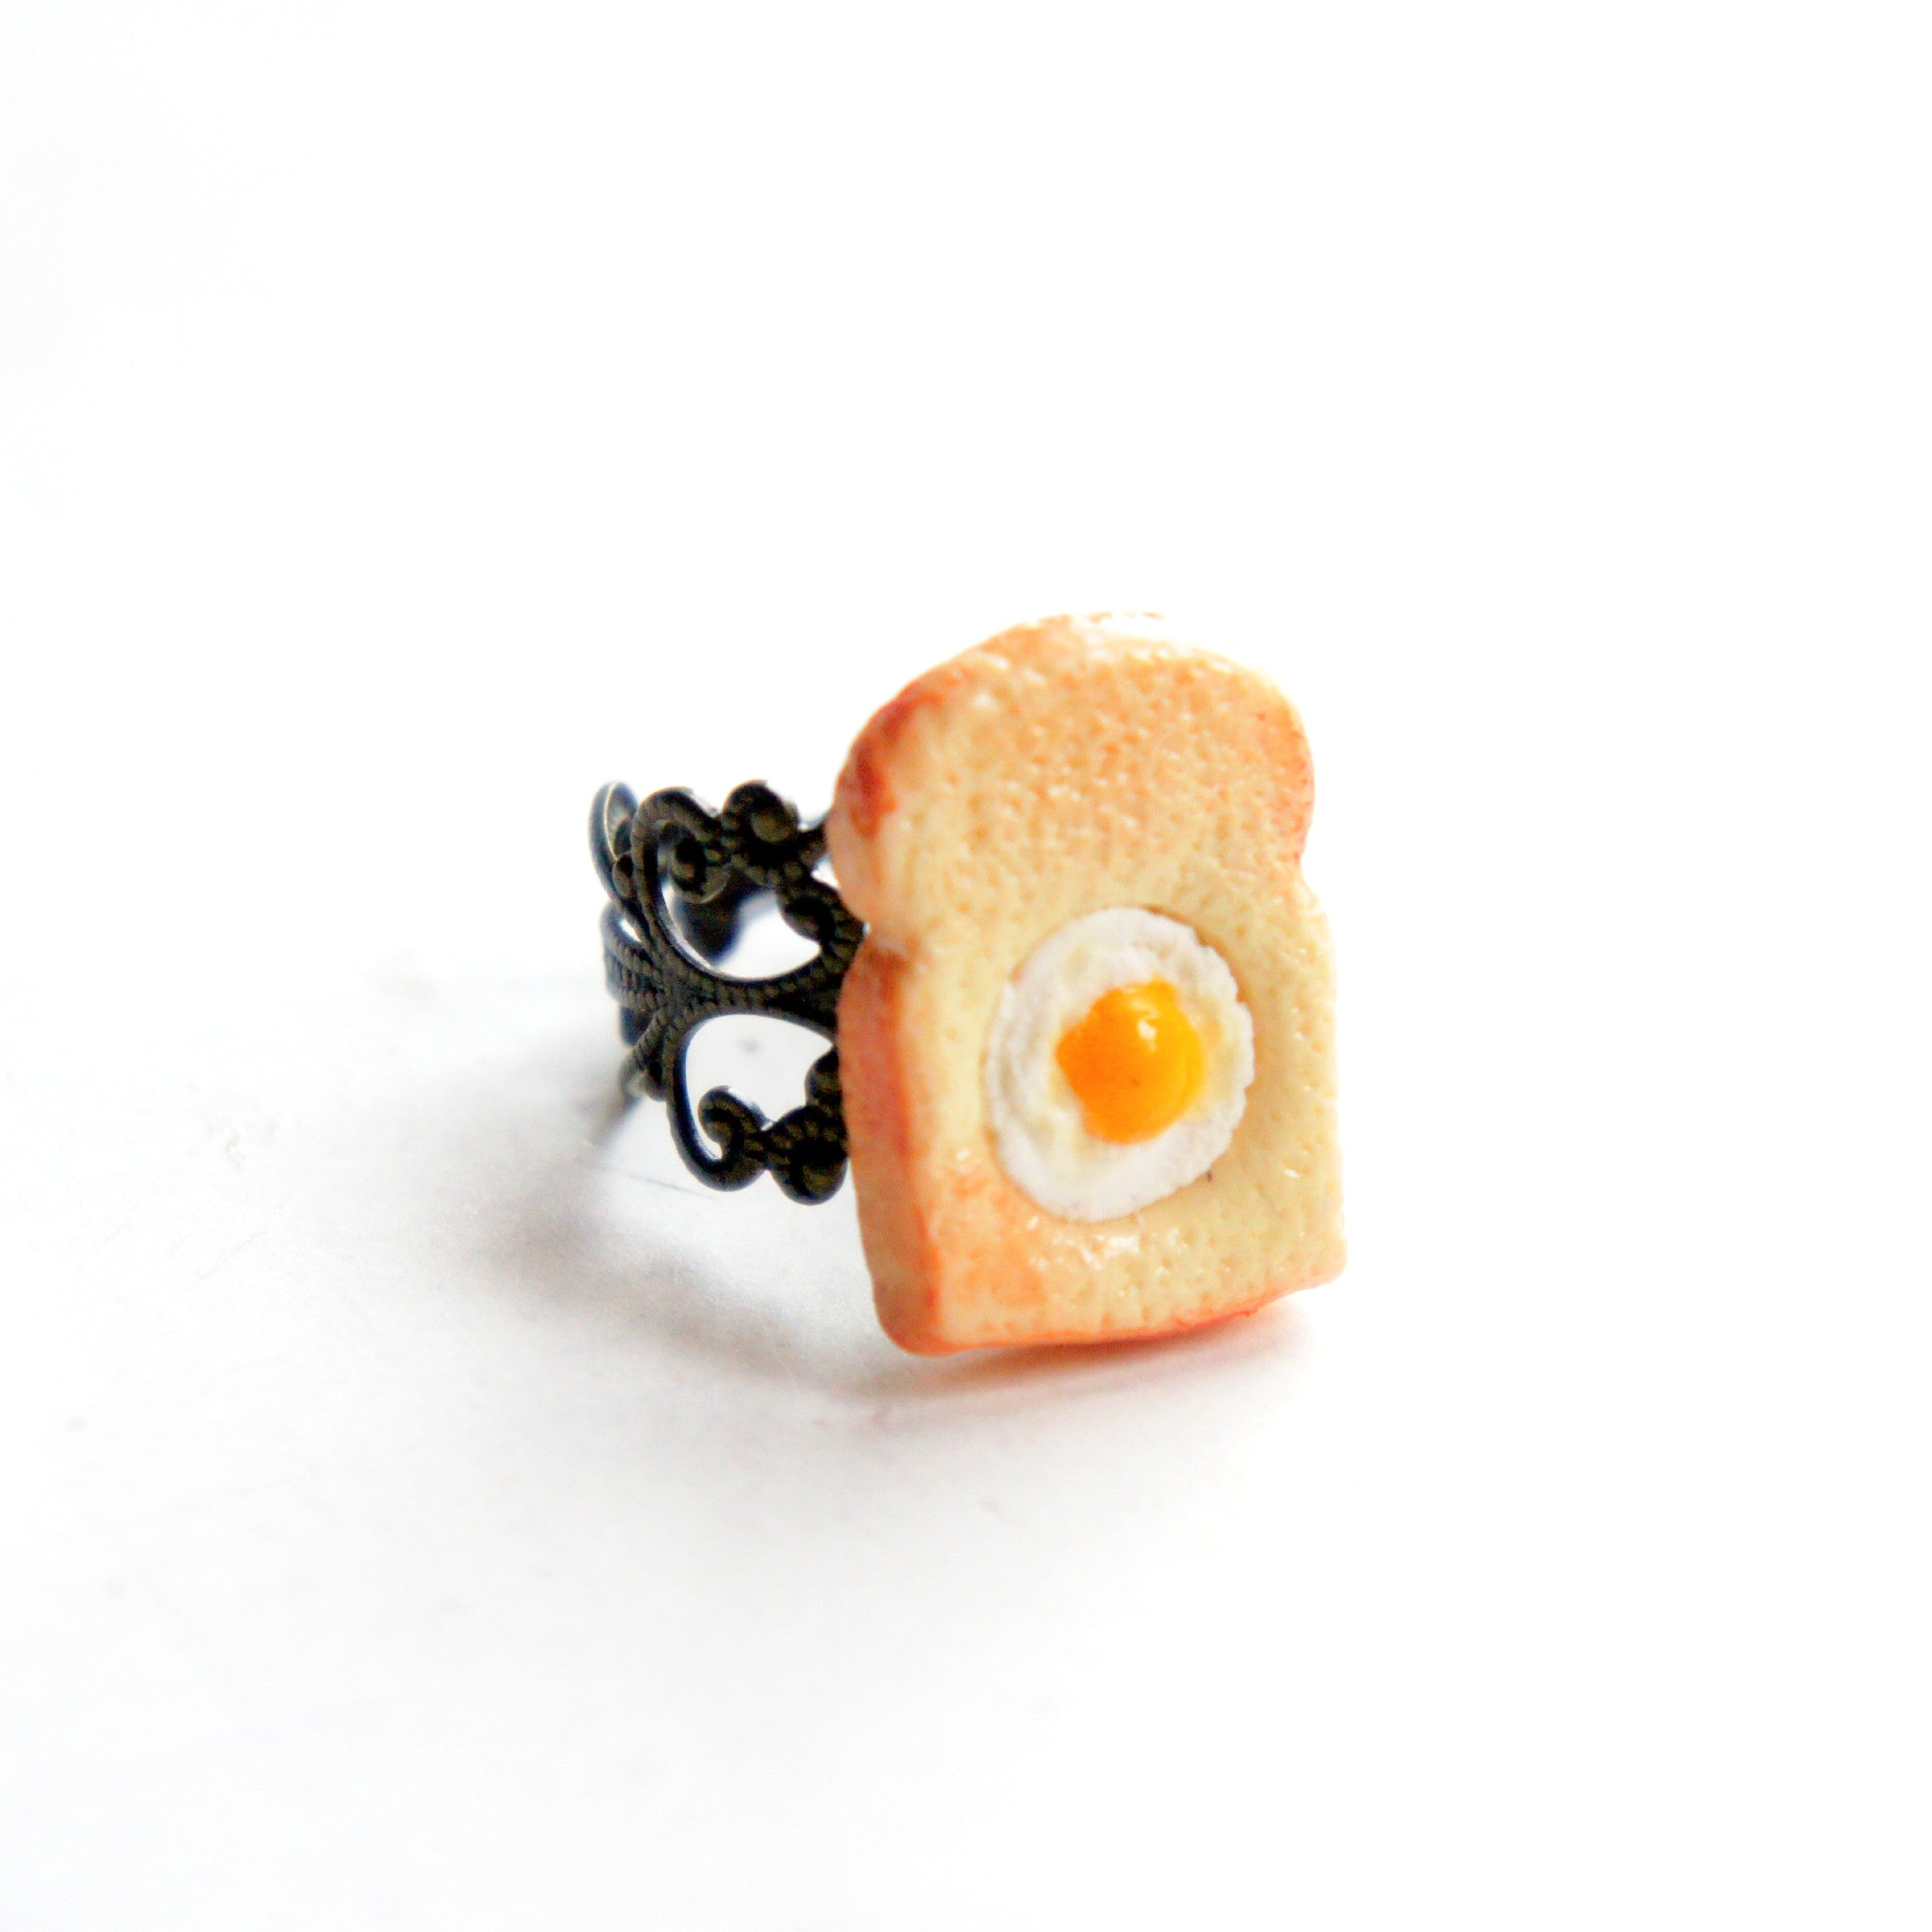 Egg in a Basket Ring - Jillicious charms and accessories